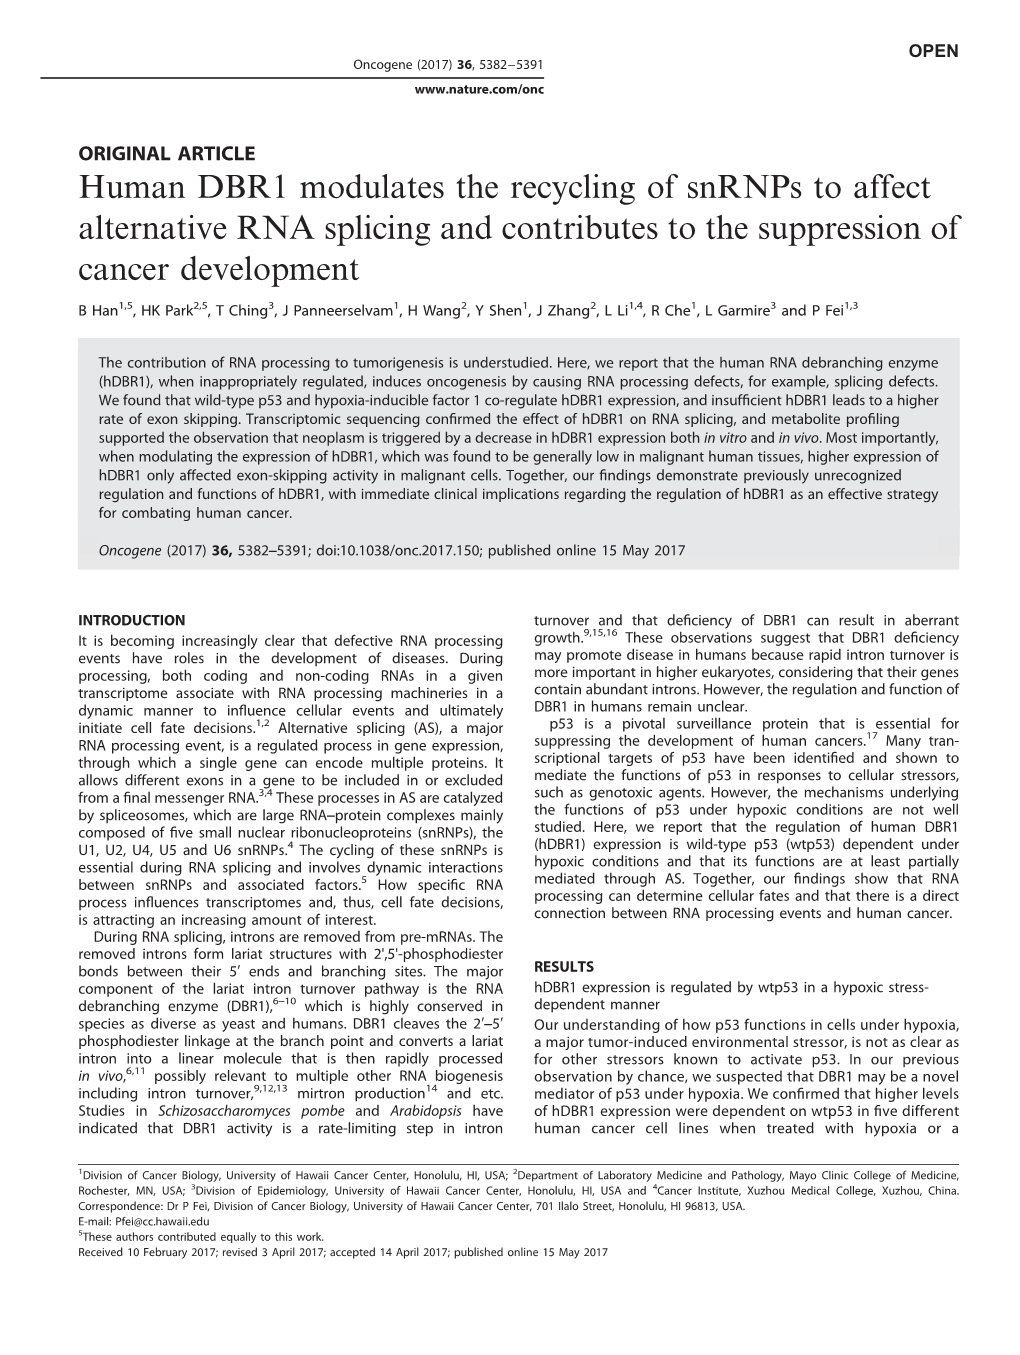 Human DBR1 Modulates the Recycling of Snrnps to Affect Alternative RNA Splicing and Contributes to the Suppression of Cancer Development